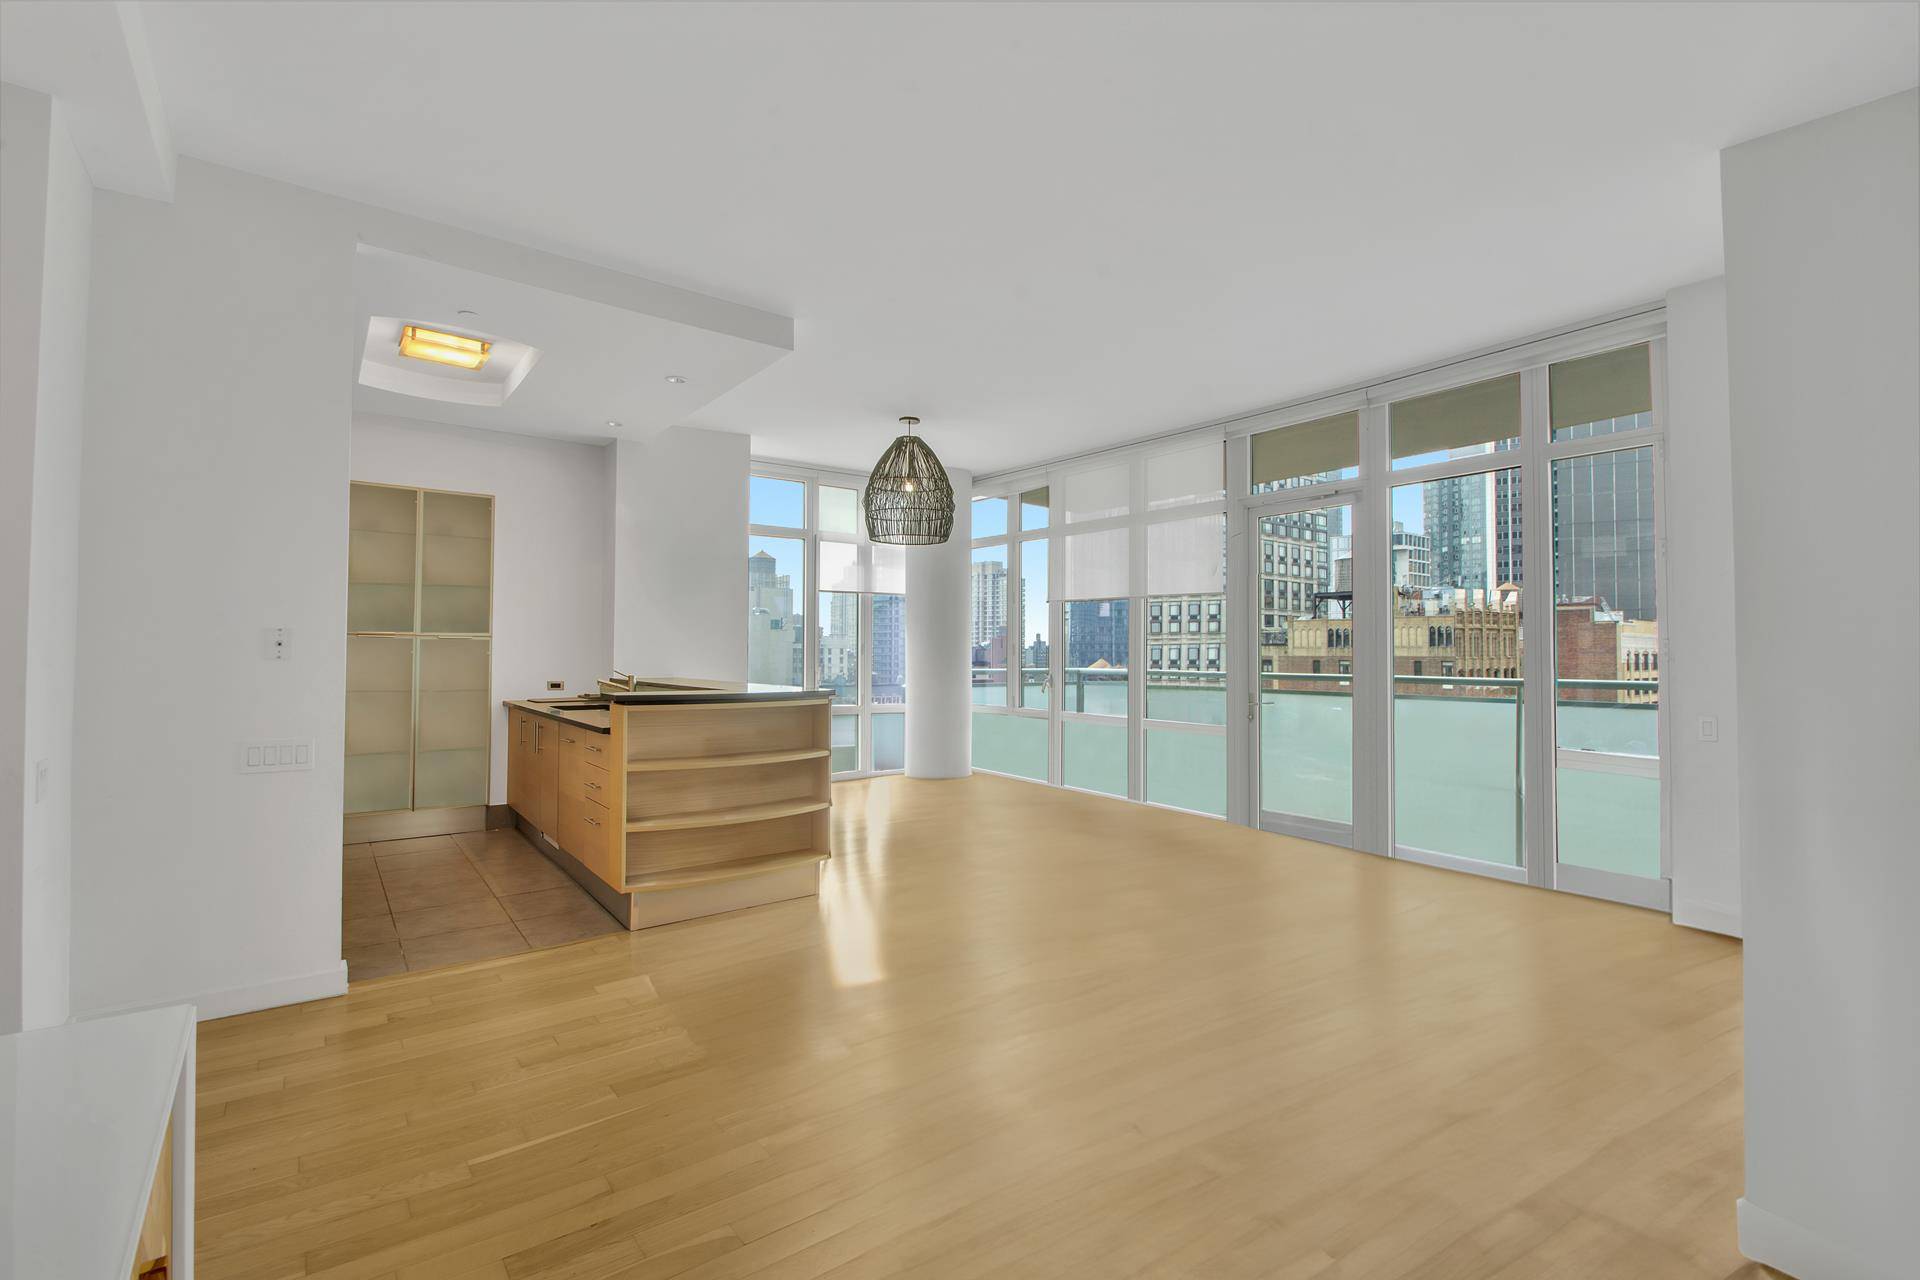 Exquisite 2 bedroom, 2 bathroom residence on a high floor at 325 Fifth Avenue, offering stunning views of New York City.